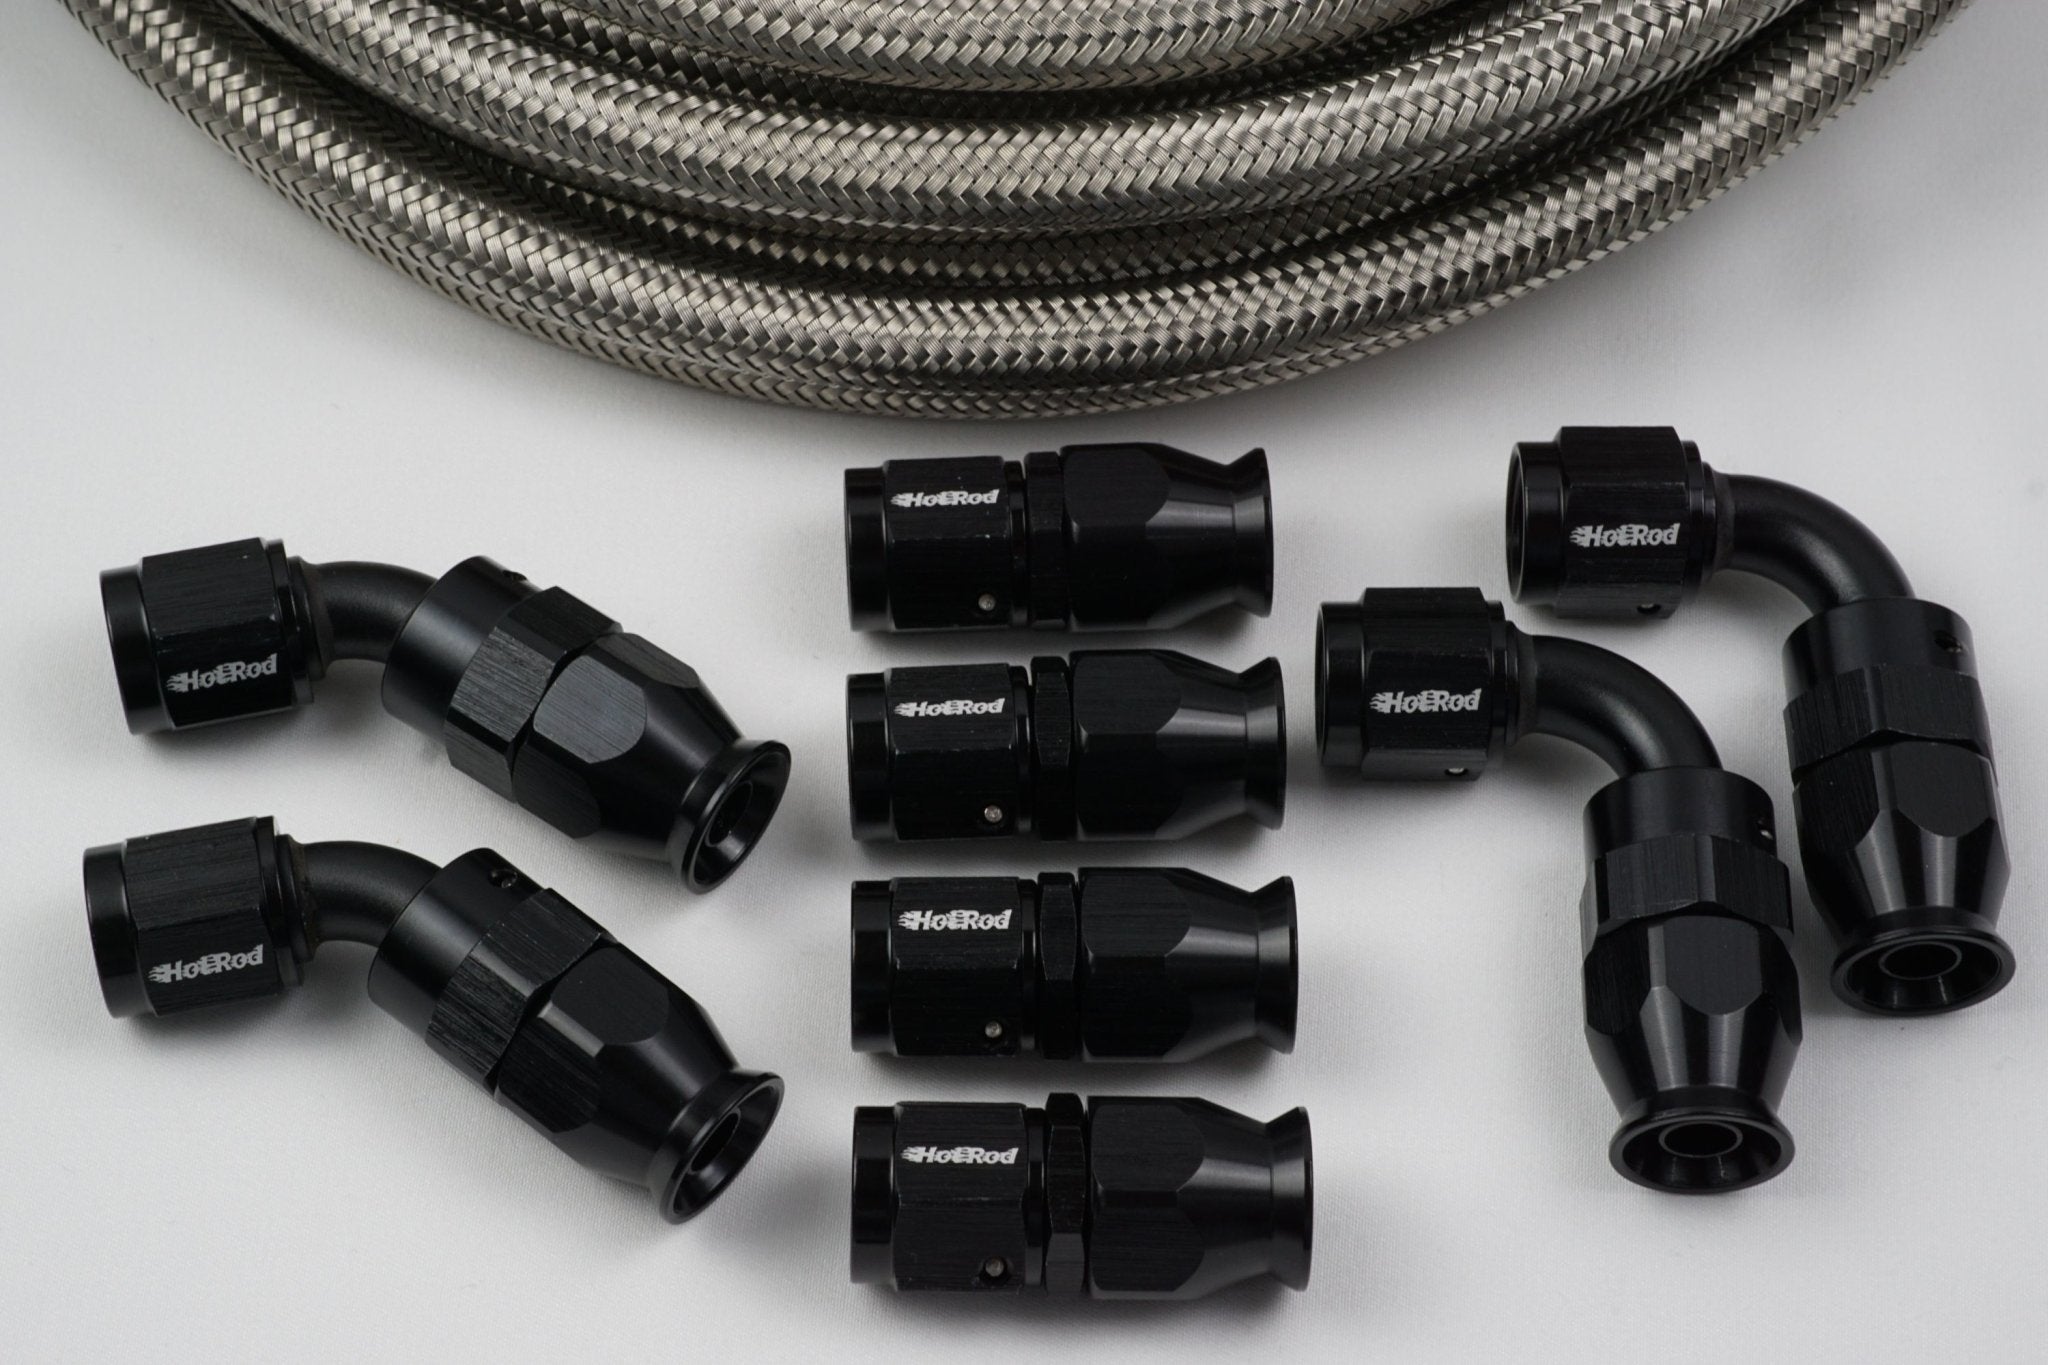 AN-6 Stainless PTFE Hose and 8 Fittings Bundle Deal